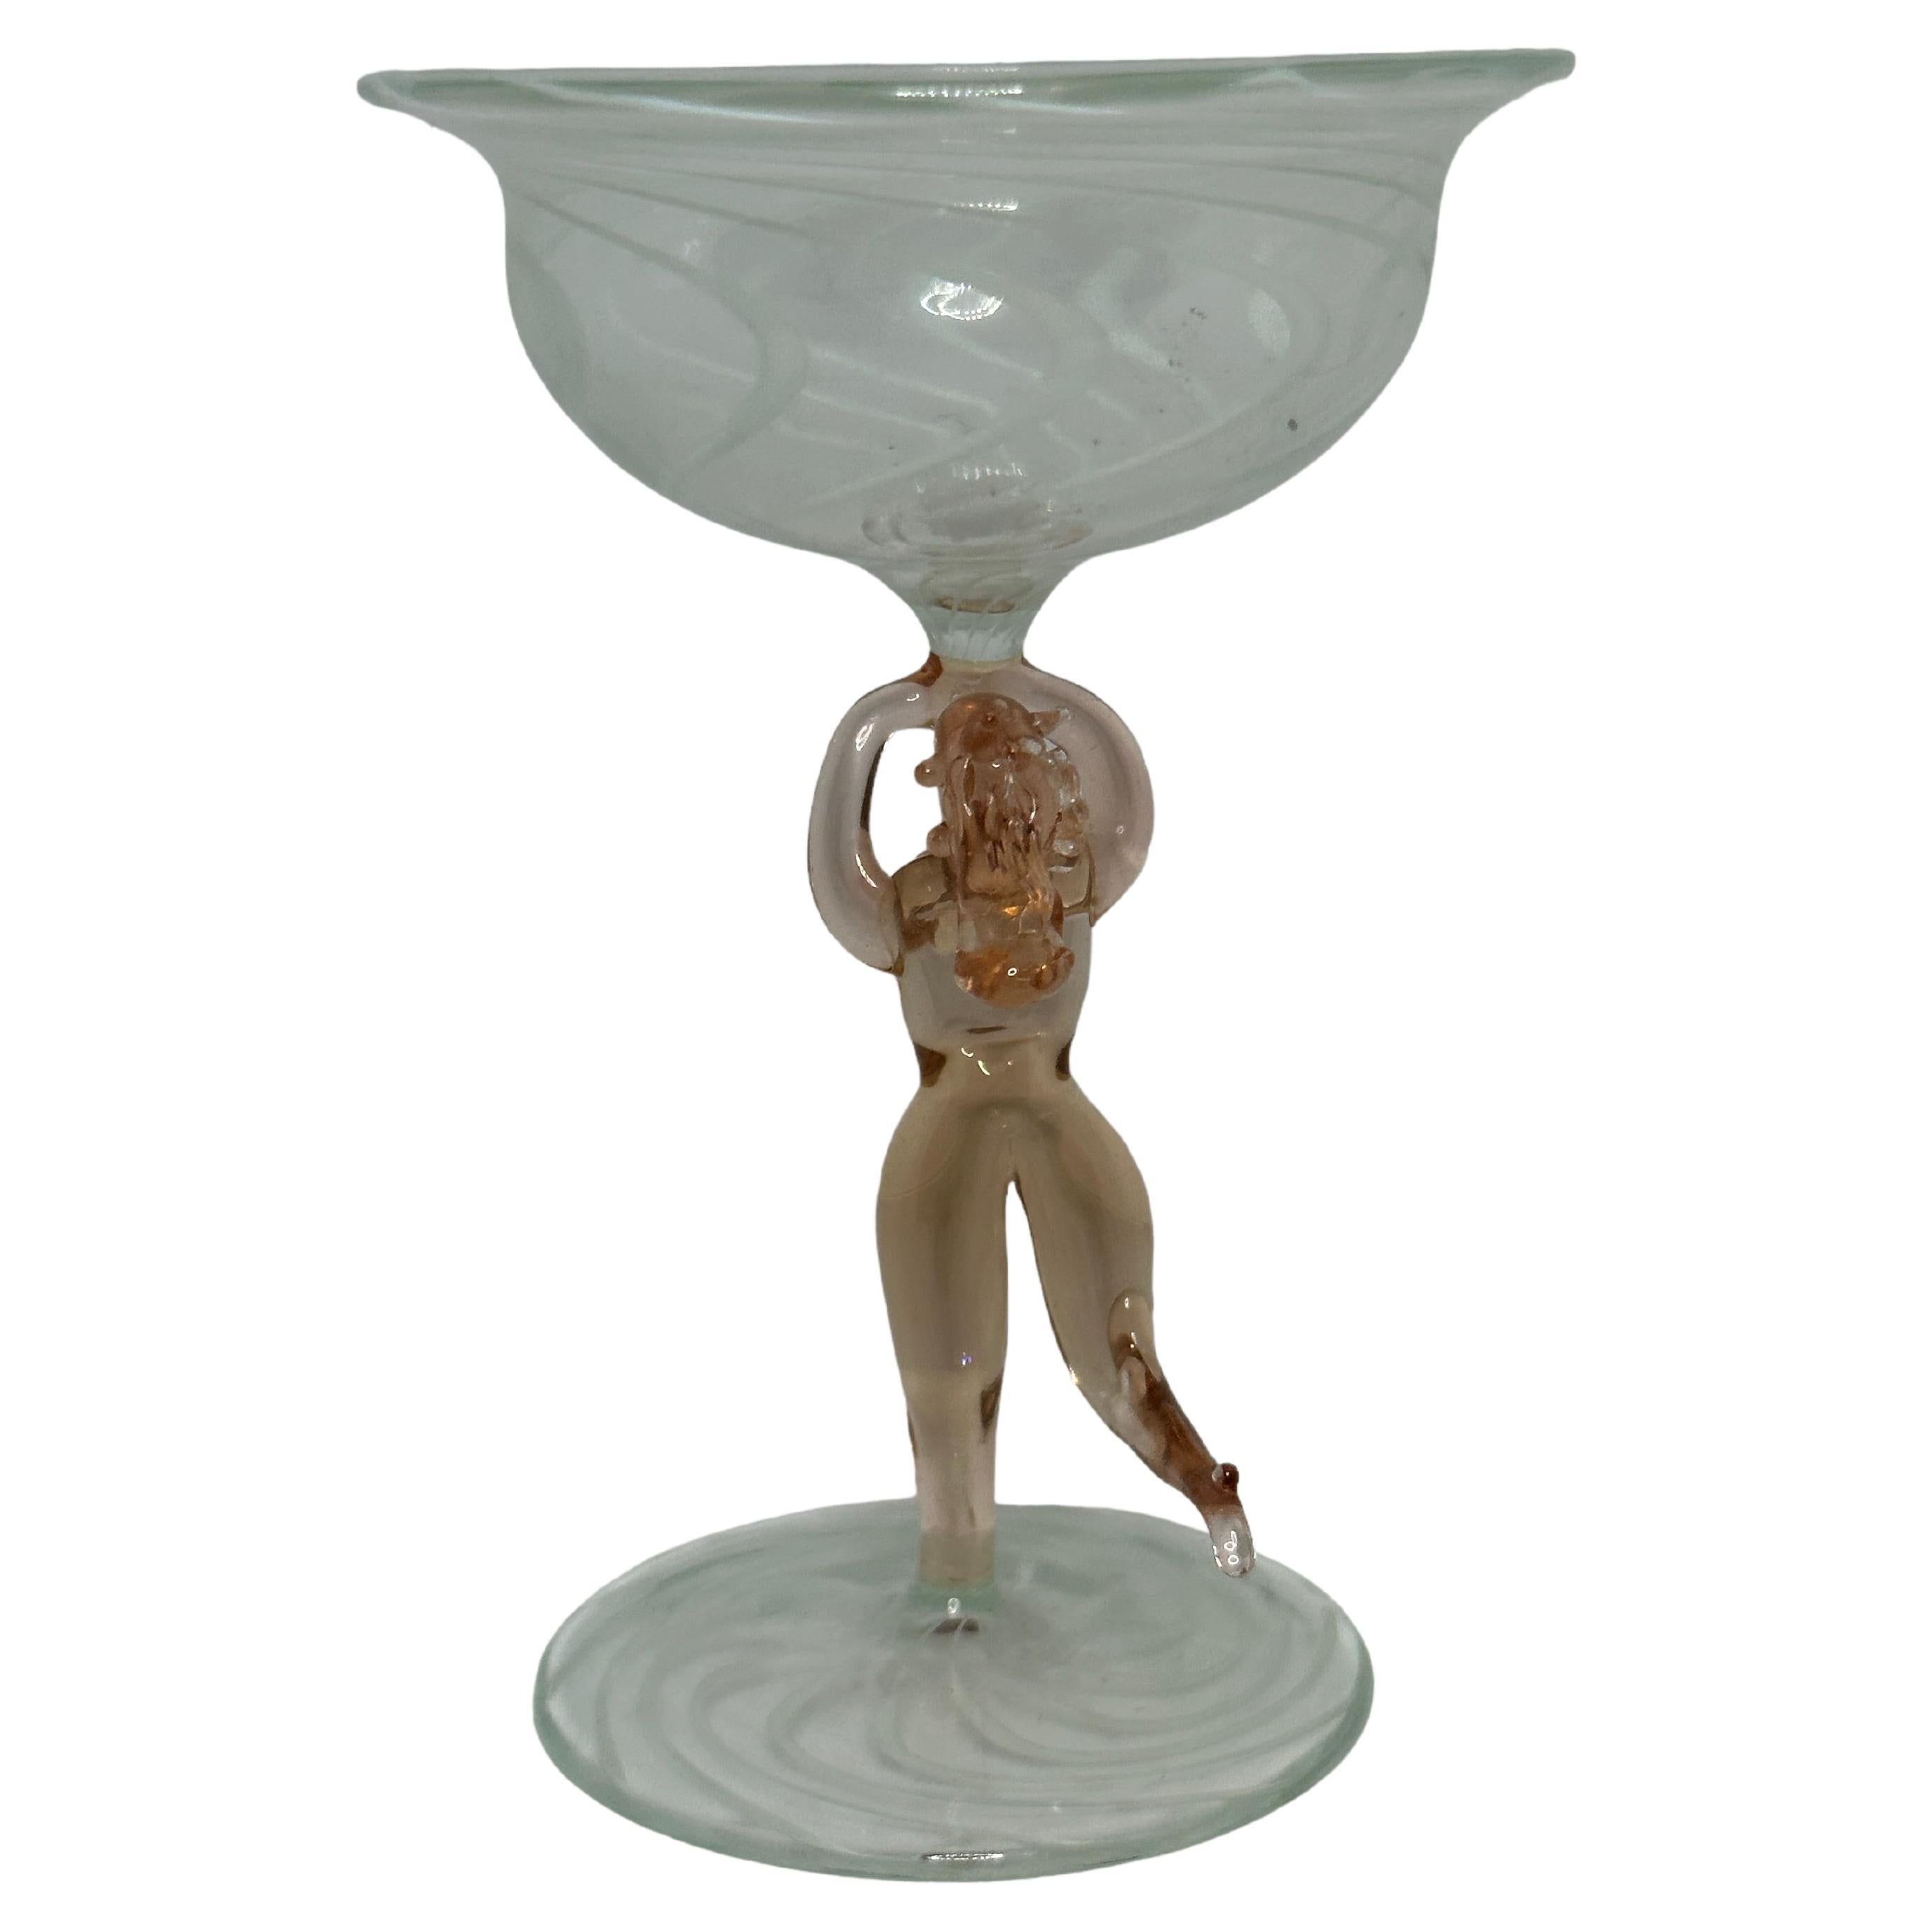 This is a beautiful single vintage stemmed cocktail glass from Austria. It features a bare women's shaft and is bimini art style. The clear glass has a wonderful swirl design, the stem depicts a nude lady in pink colour. The base is a beautiful